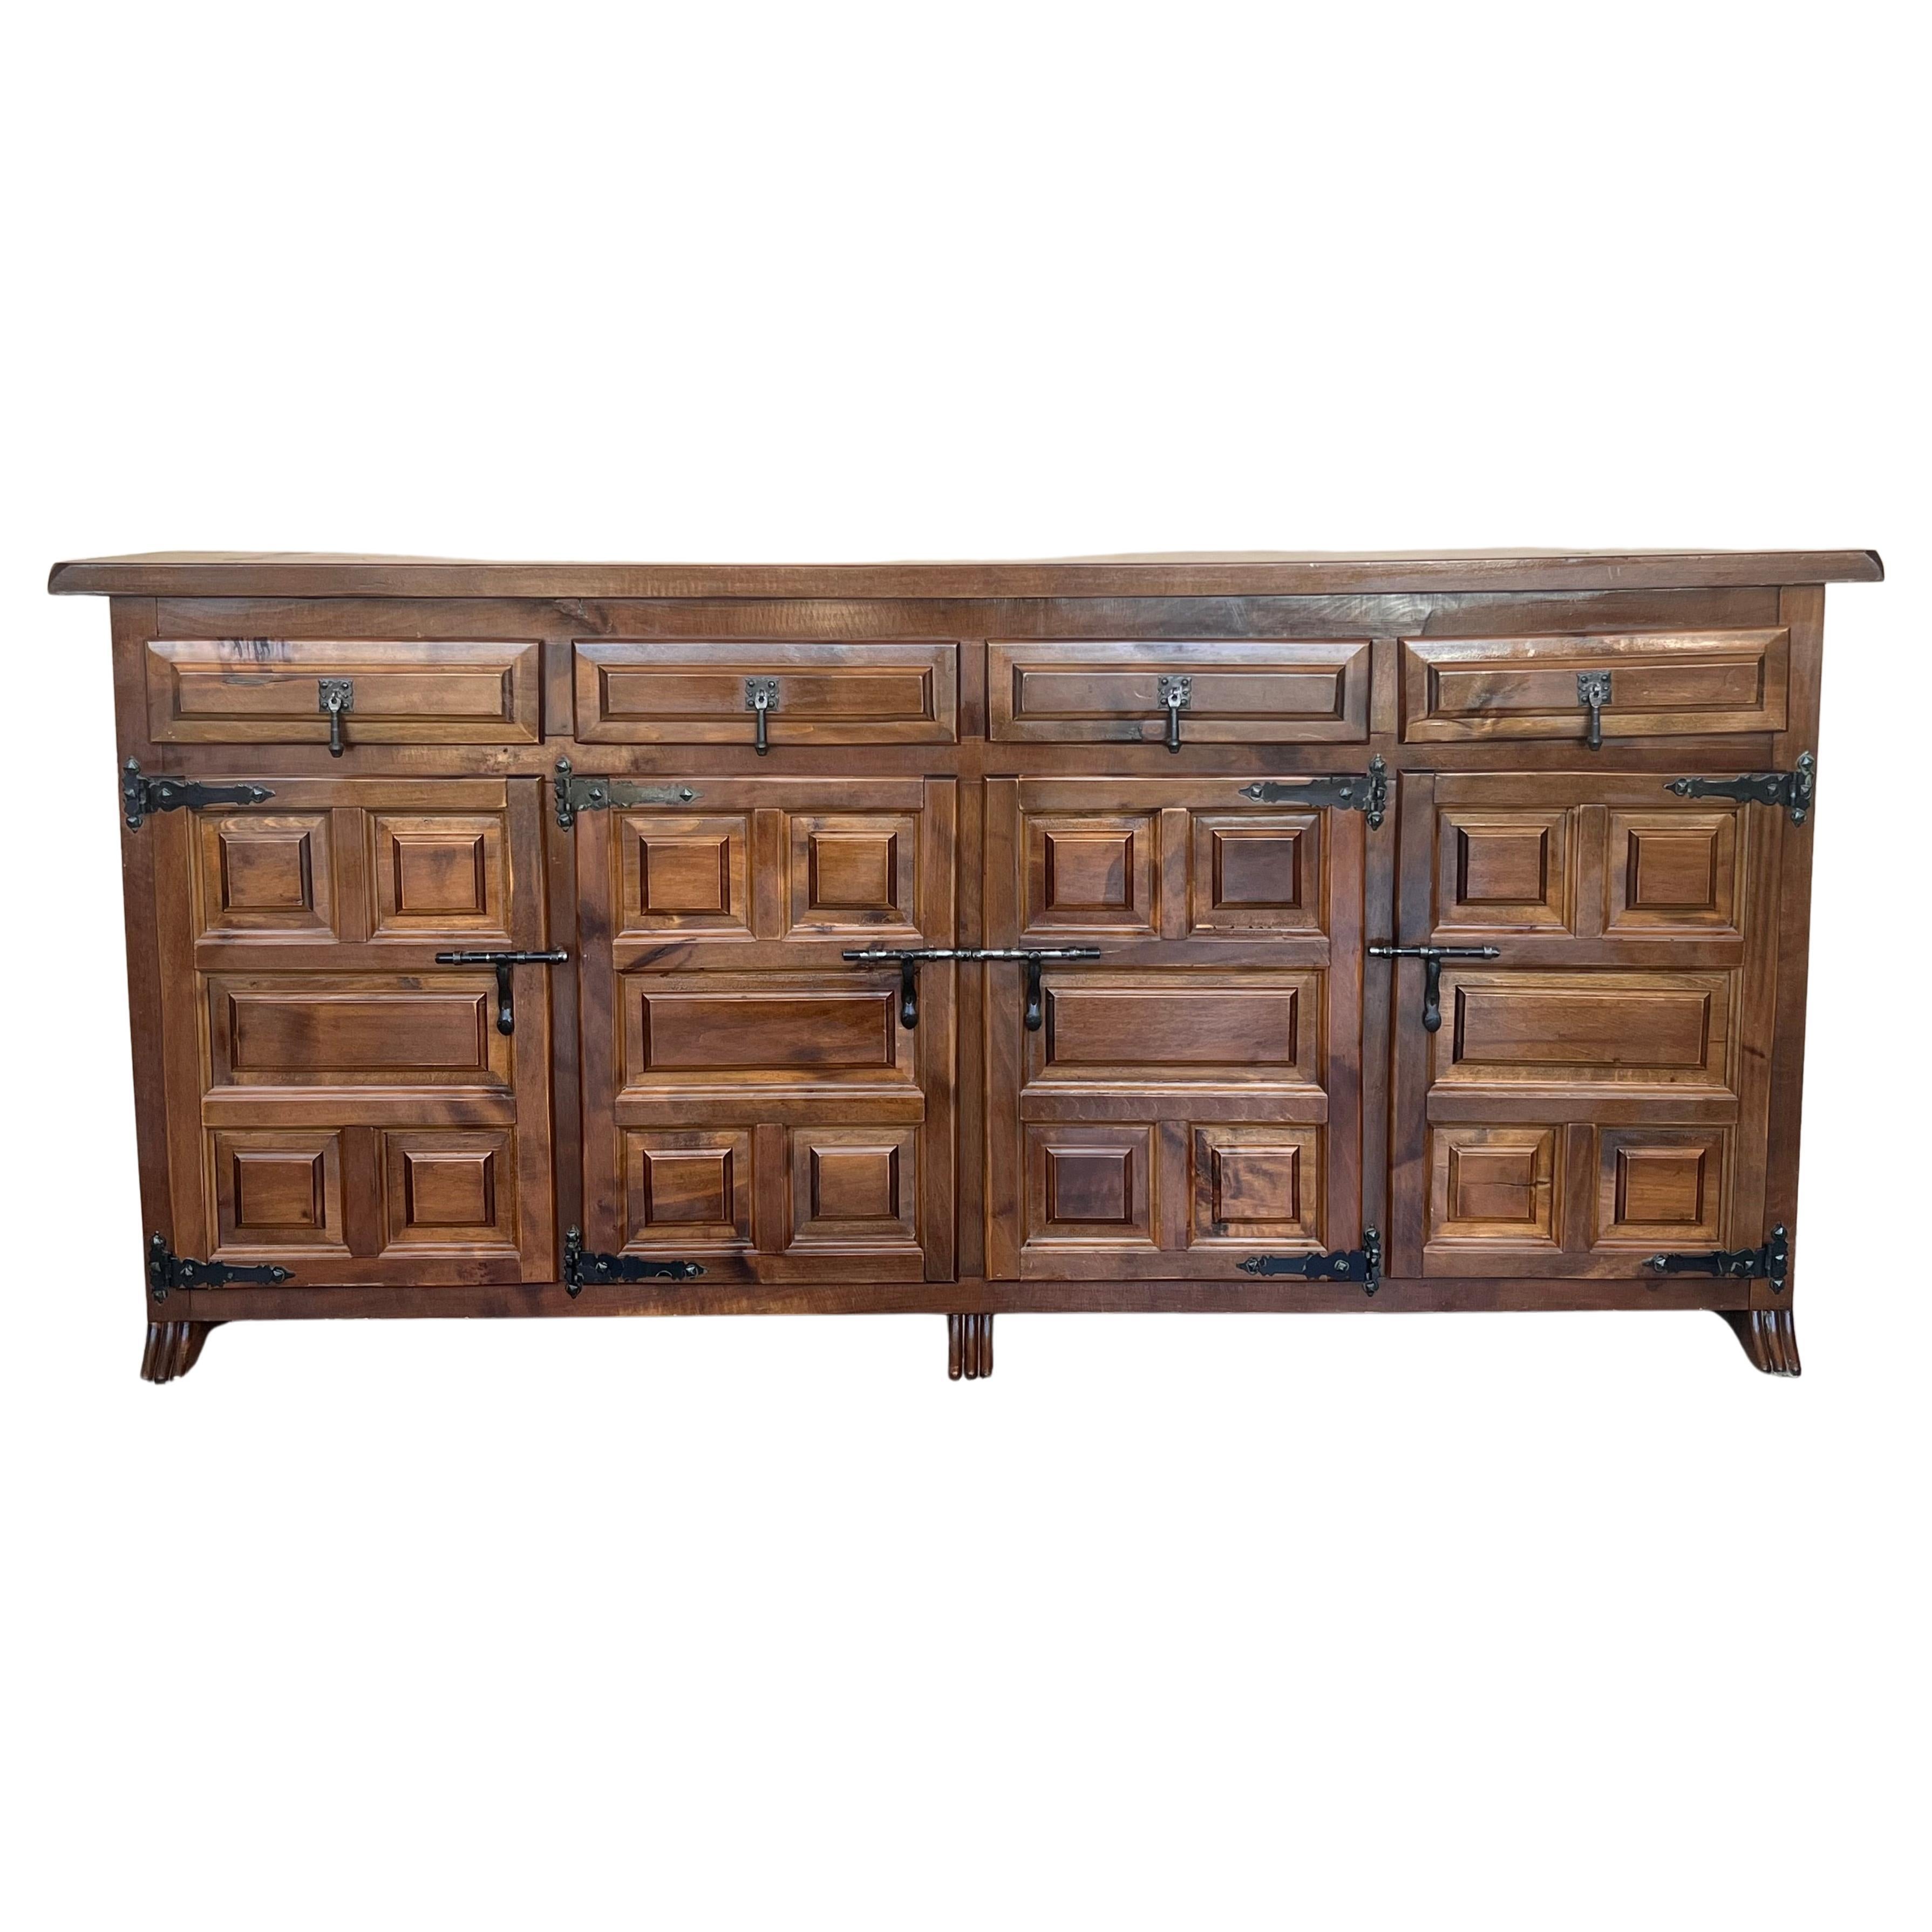 19th Century Large Catalan Spanish Baroque Carved Oak Tuscan Credenza or Buffet For Sale